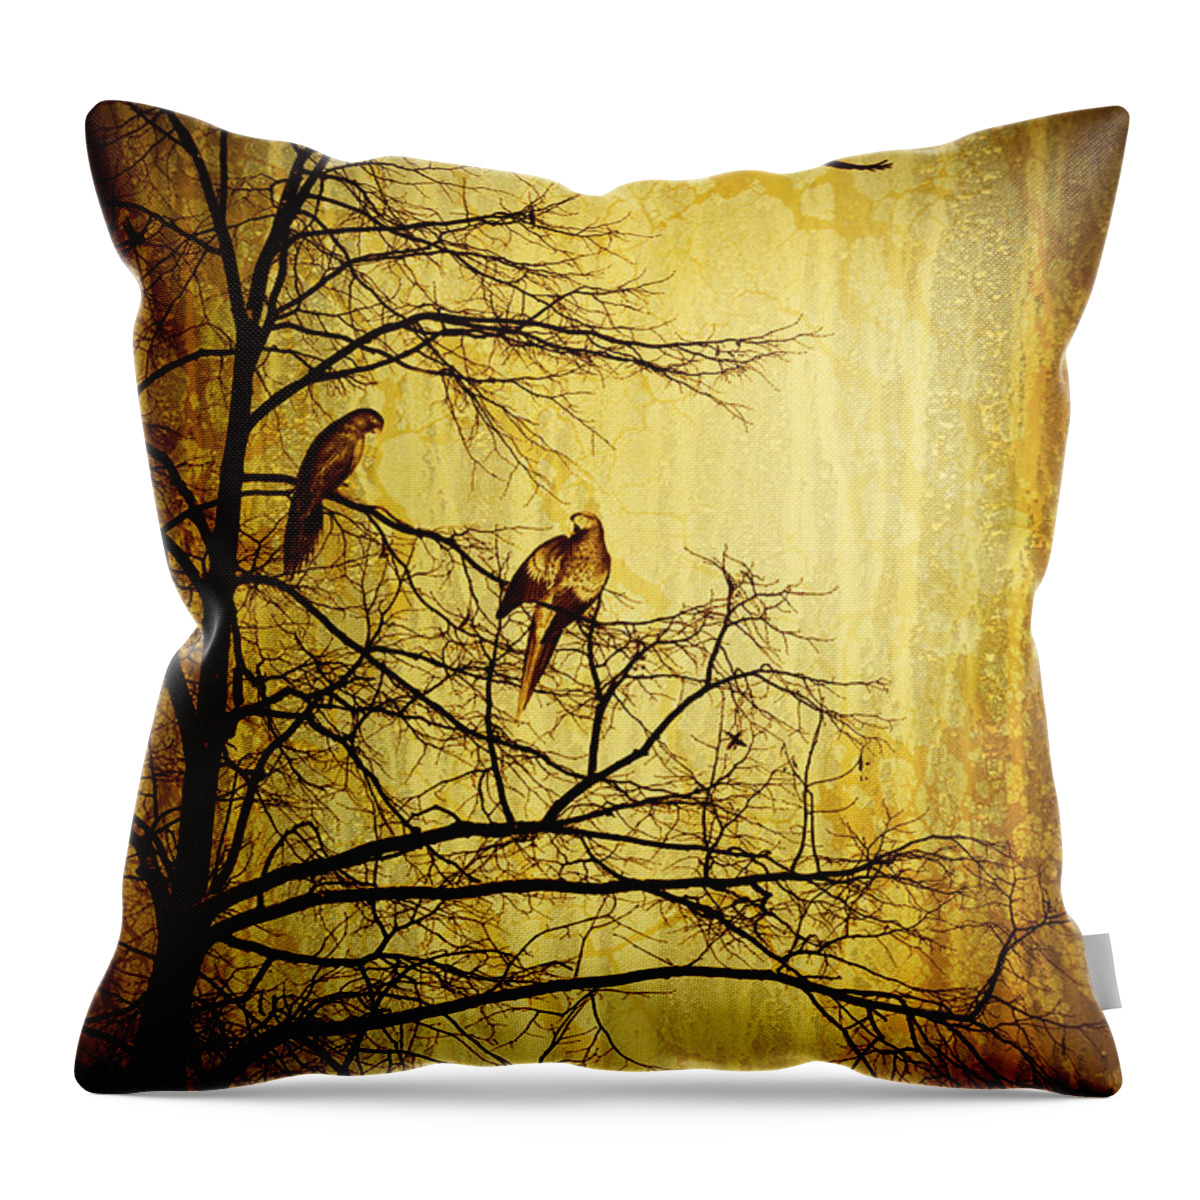 Yellow Throw Pillow featuring the photograph Migratory by Lourry Legarde